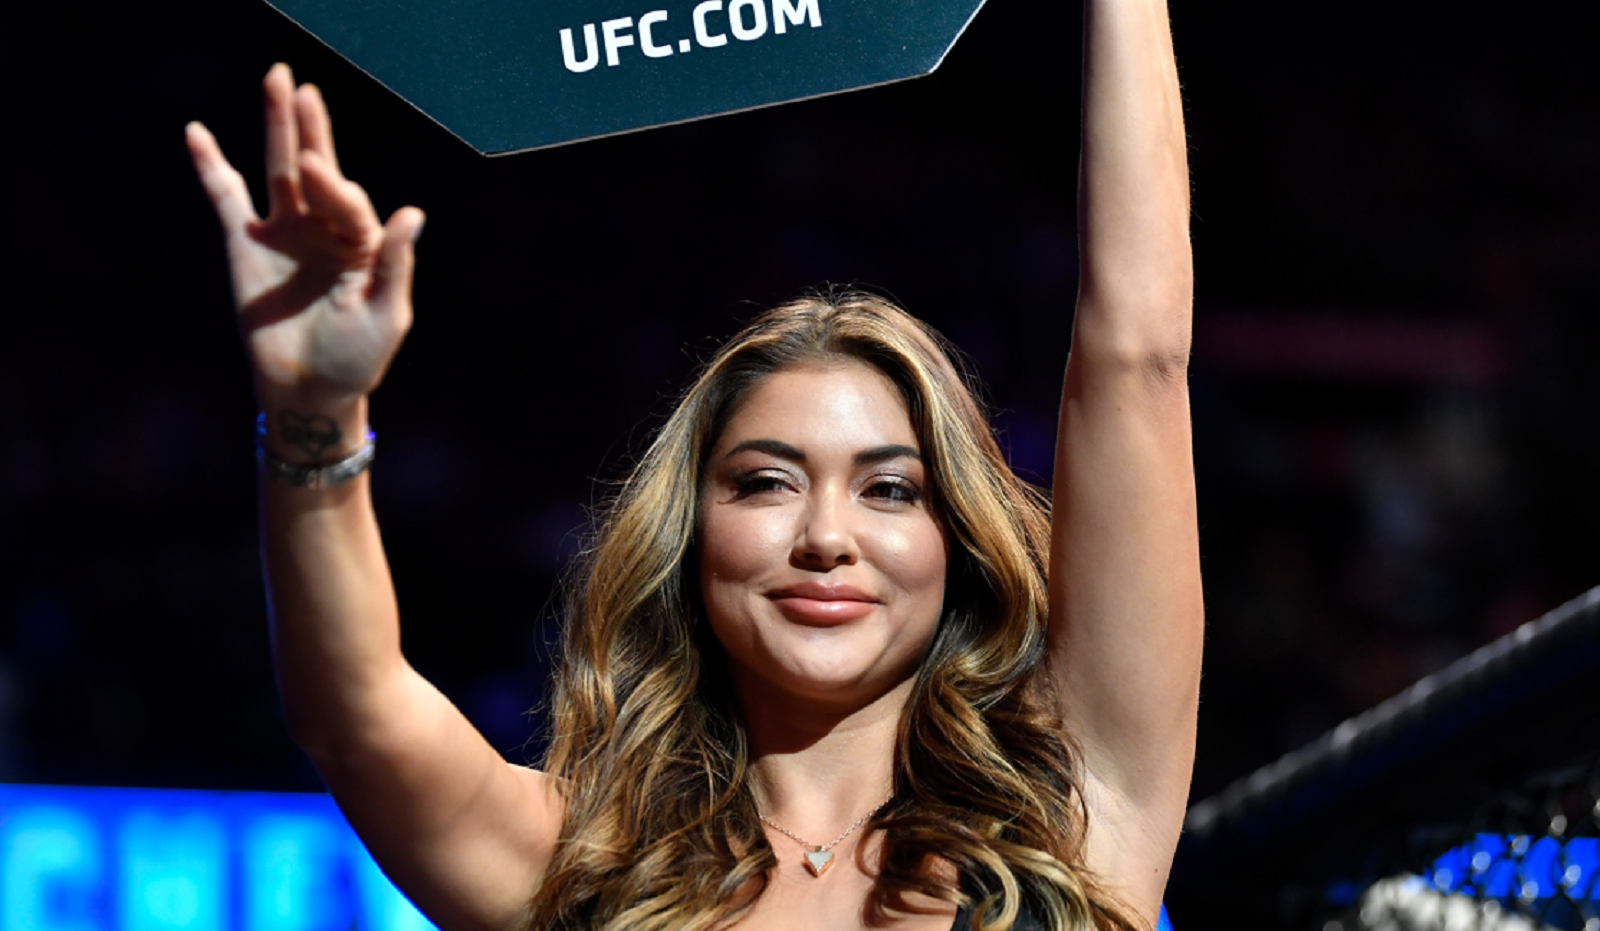 UFC ring girl goes viral after she takes a shirtless Instagram pic